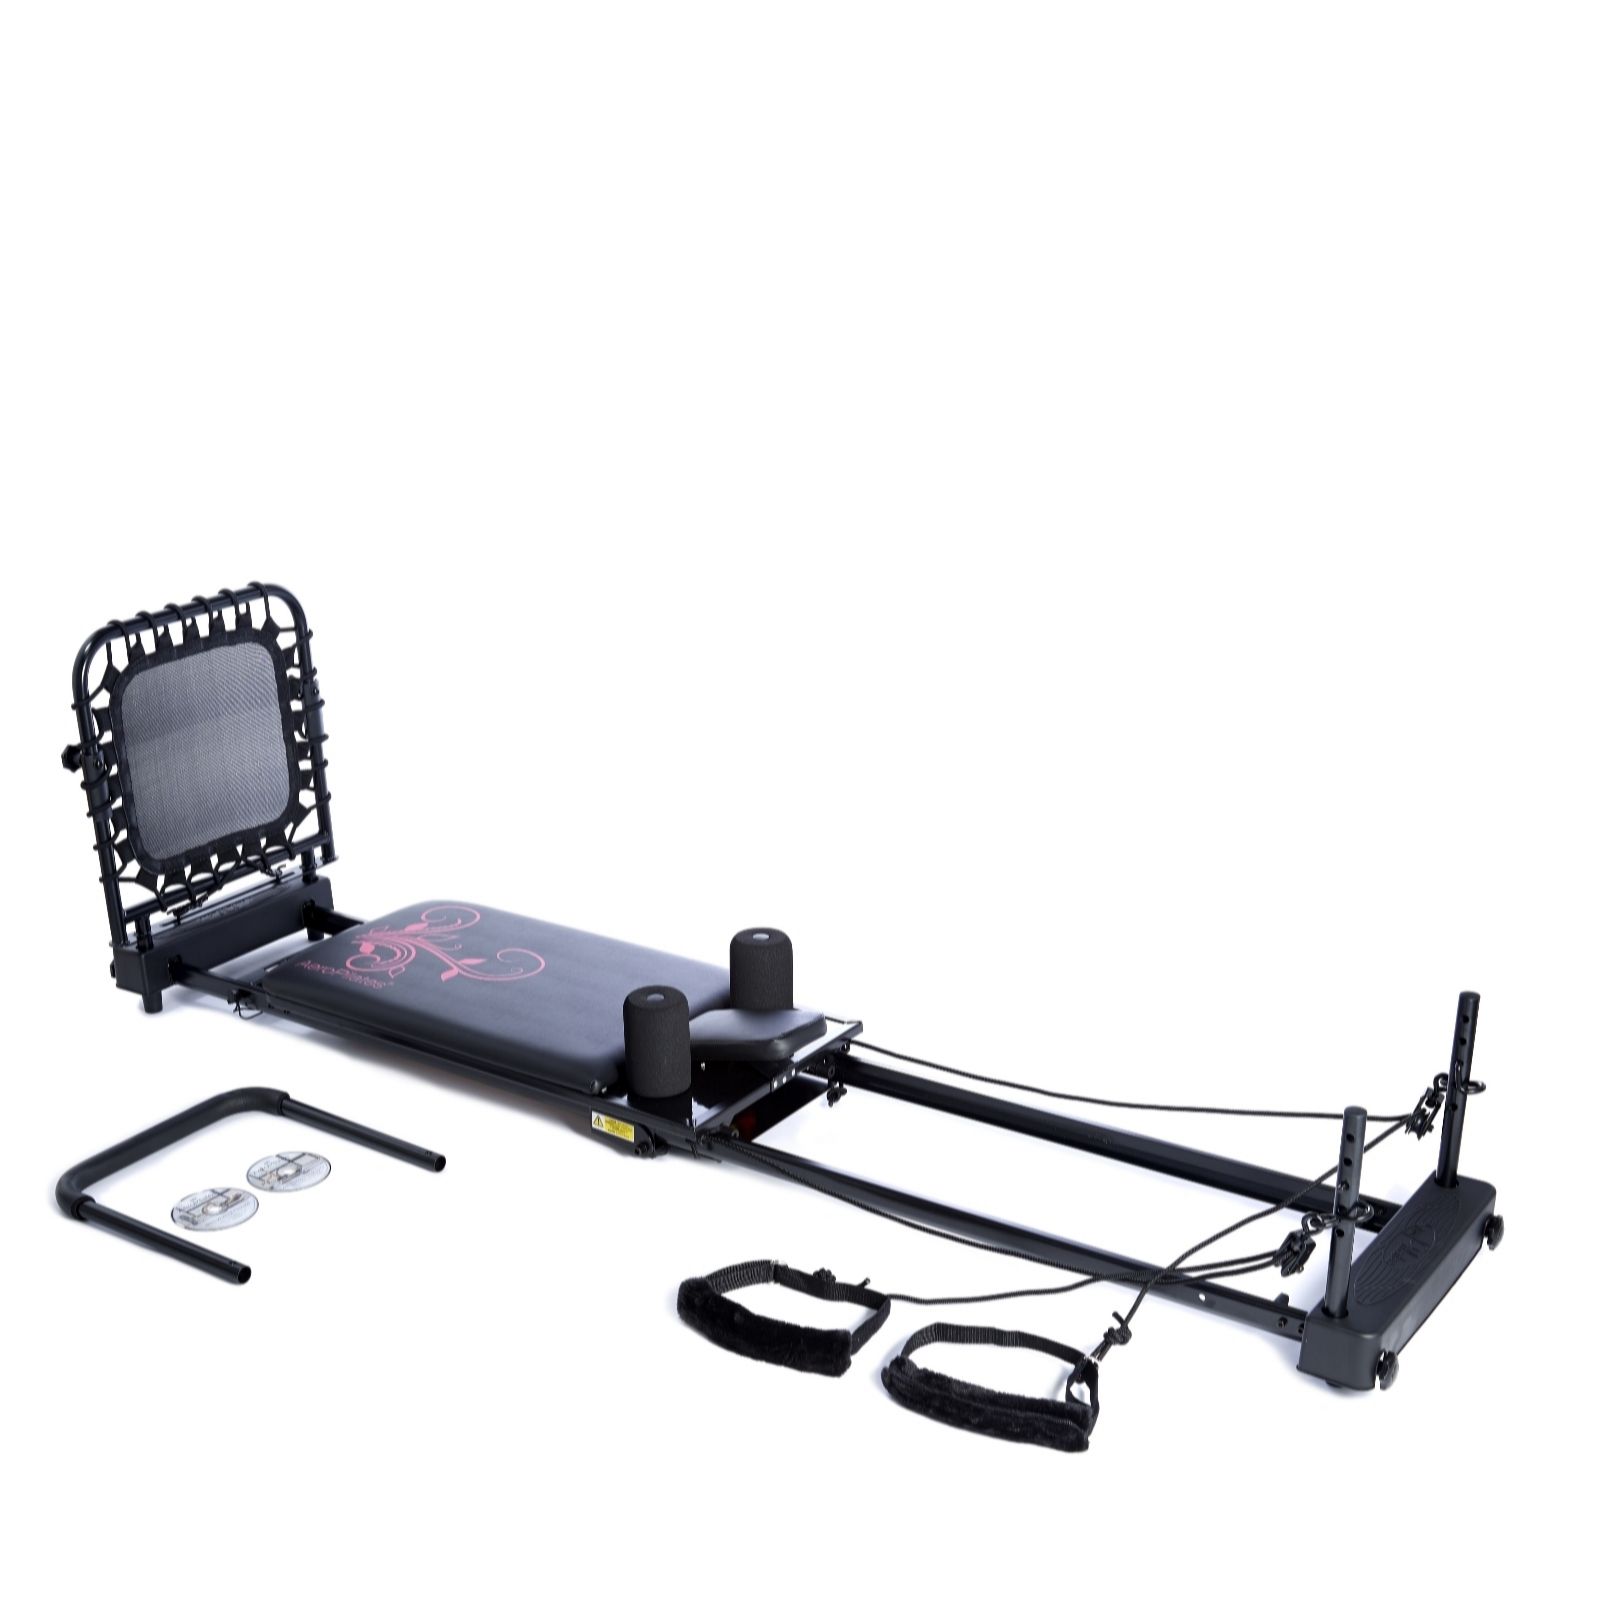 AeroPilates 4 Cord Reformer 435 with DVD Library